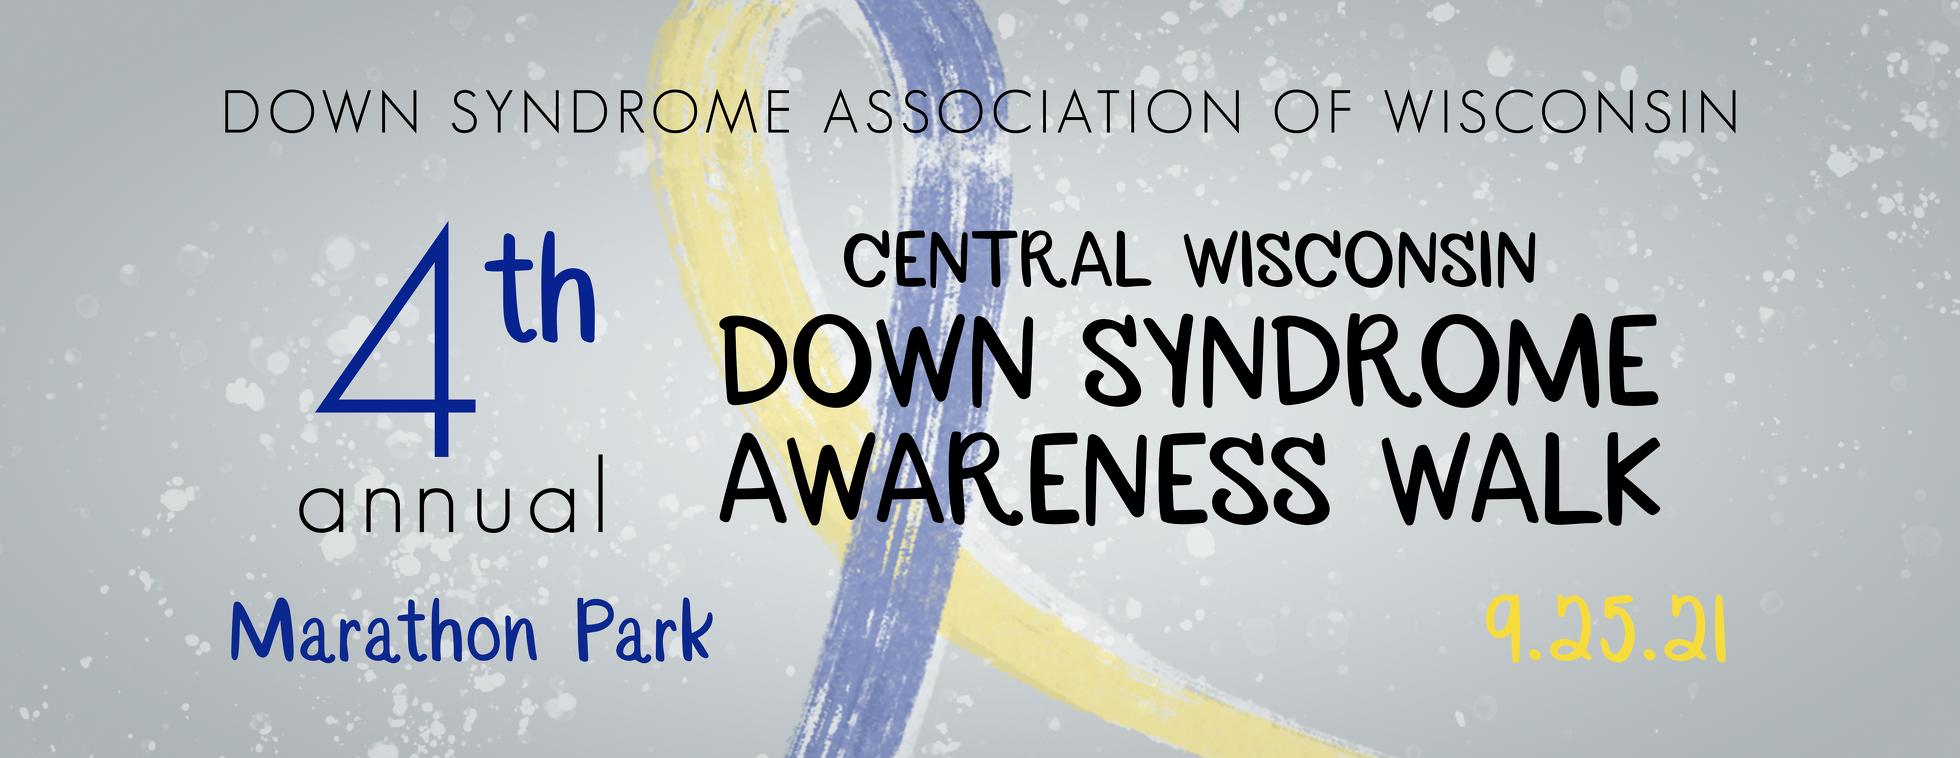 4th Annual DSAW- Central WI Down Syndrome Awareness Walk